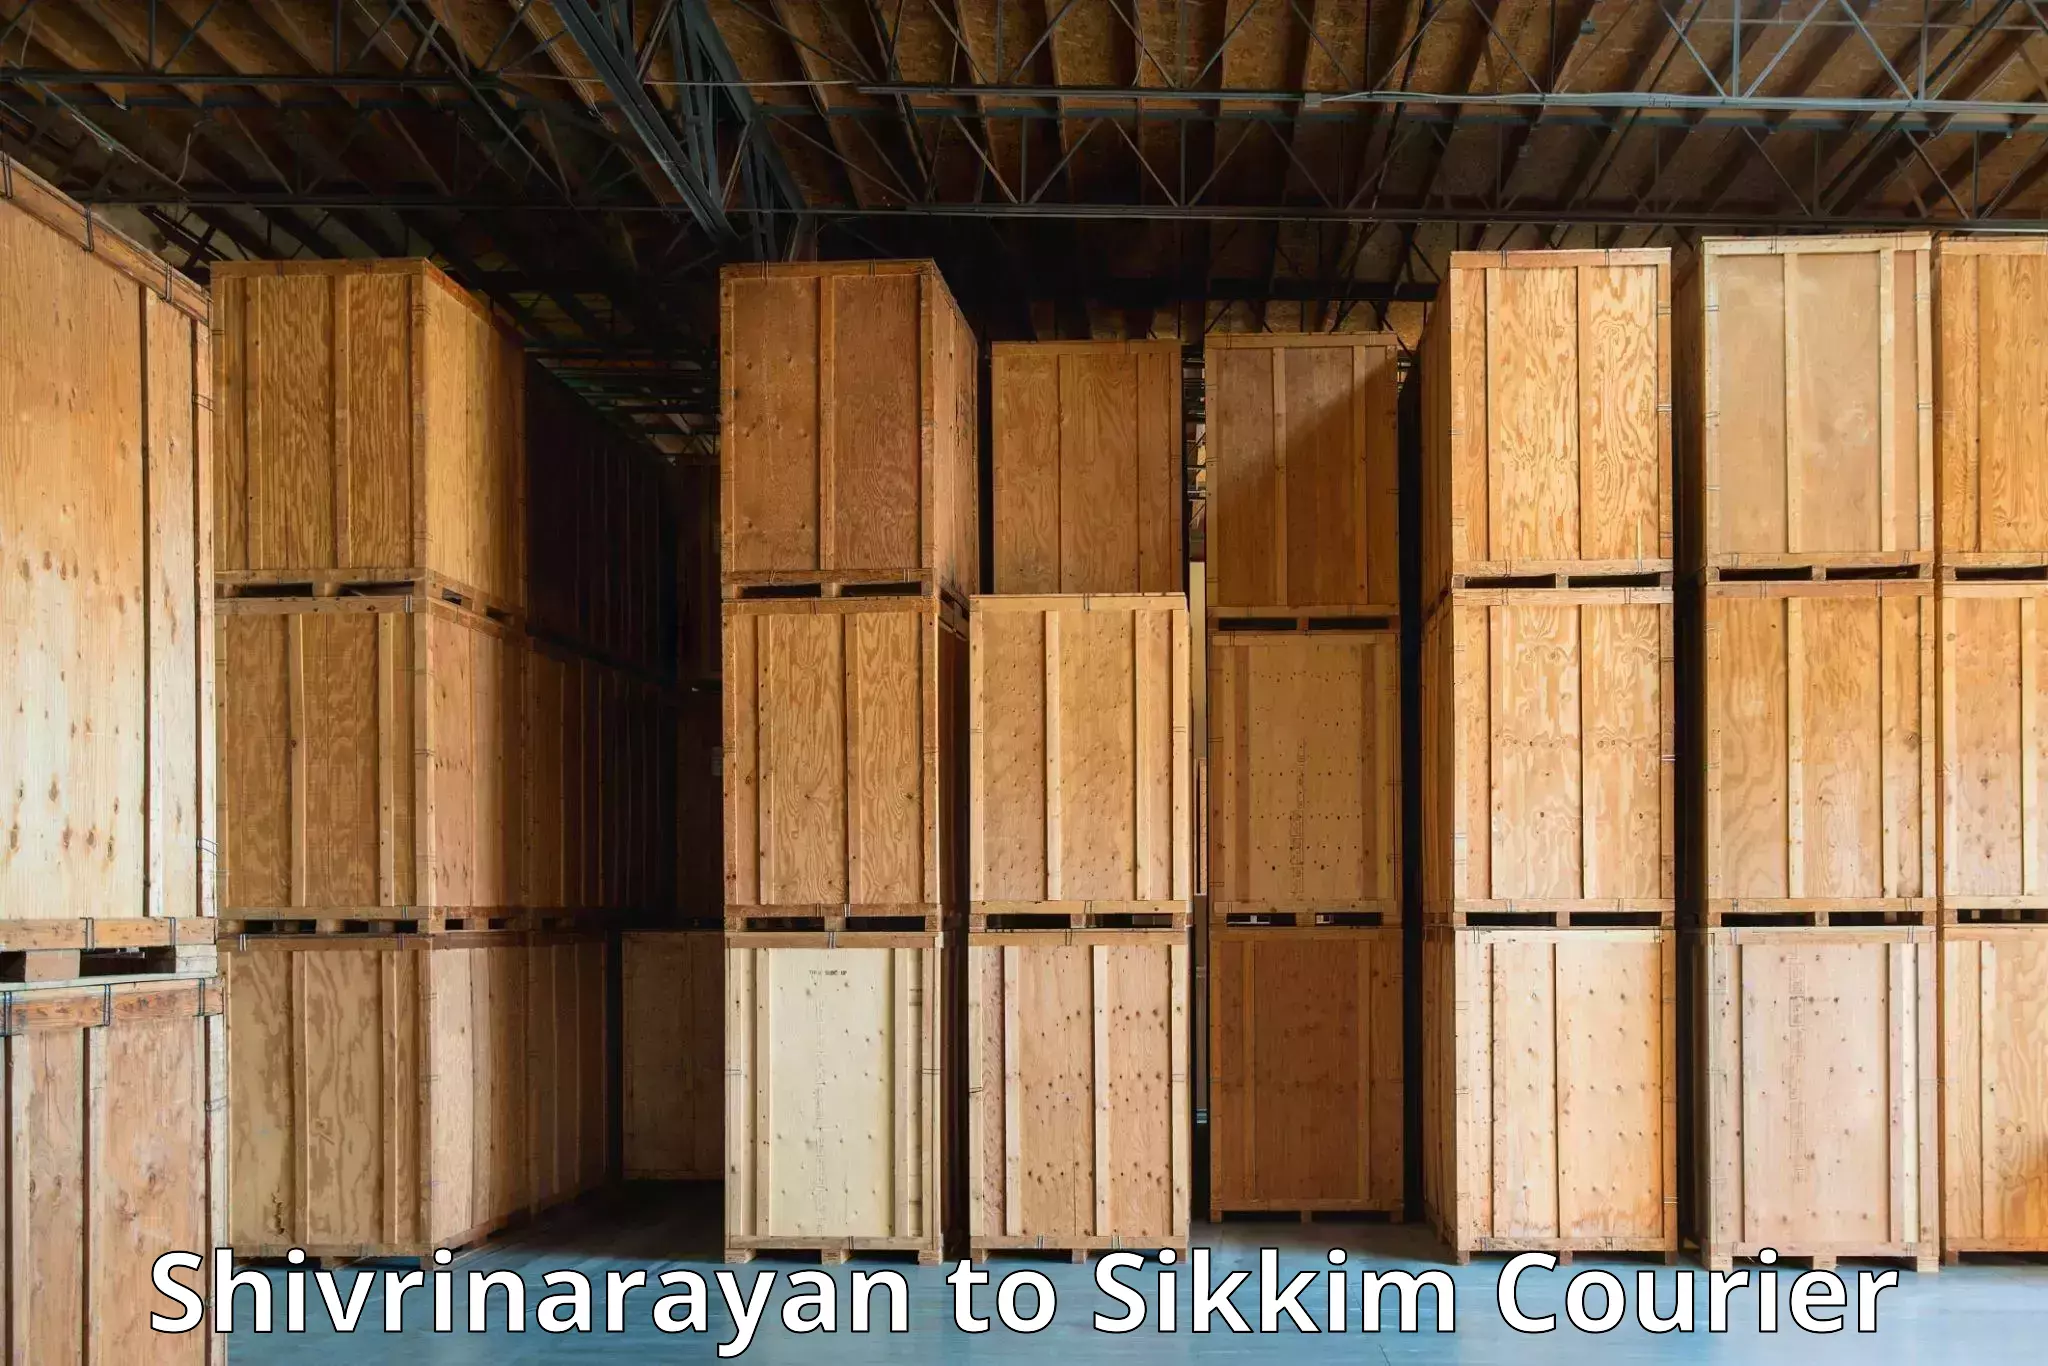 Delivery service partnership Shivrinarayan to East Sikkim